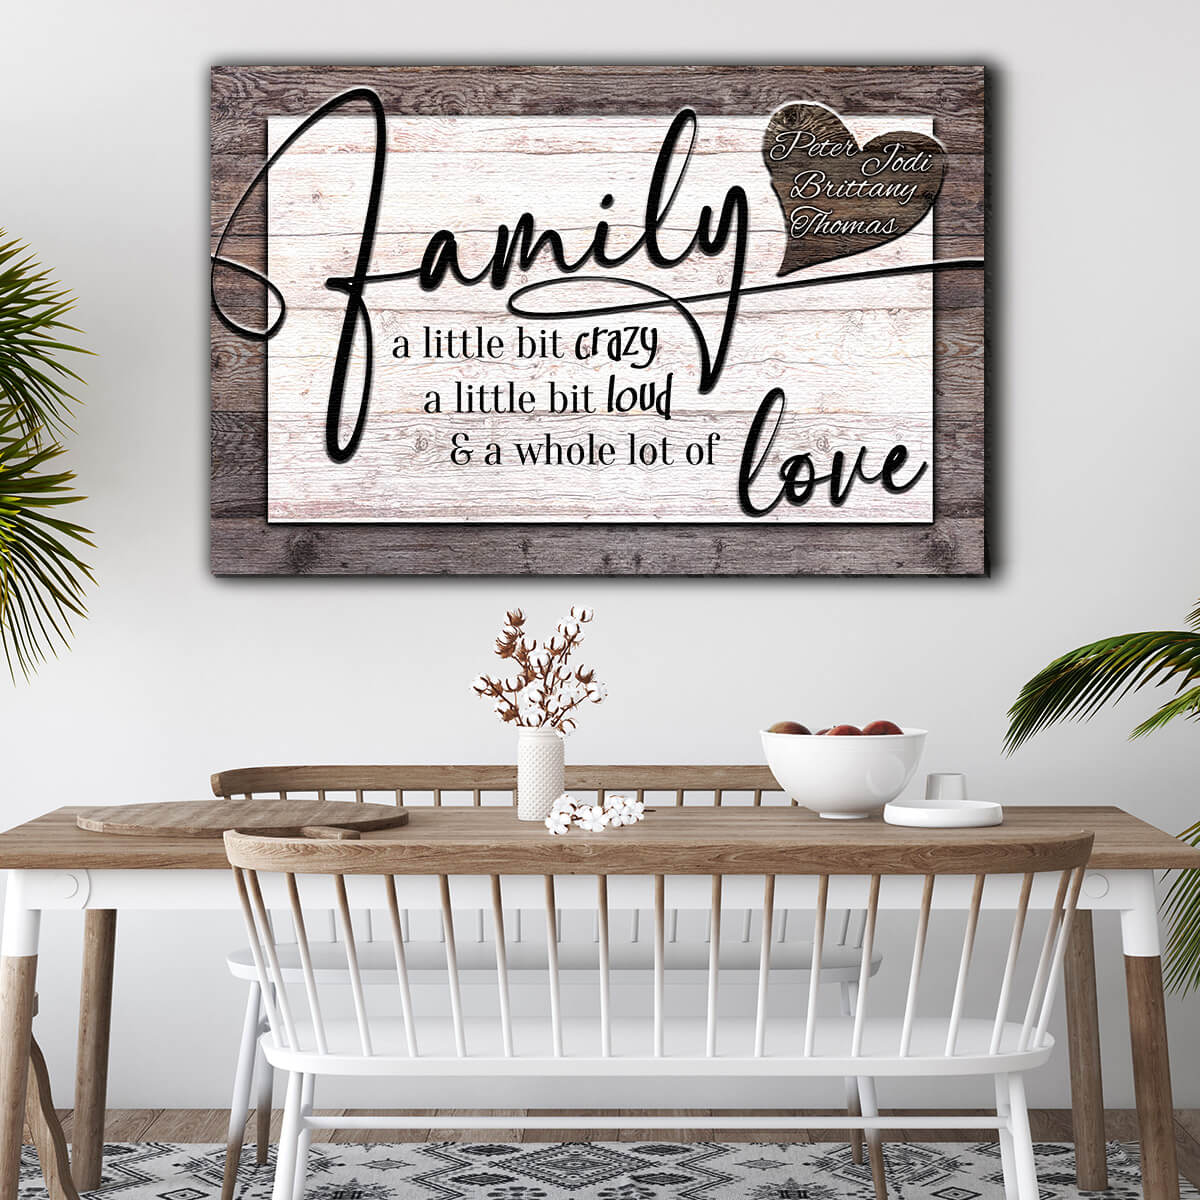 Personalized Heart Design "Family...Crazy, Loud, Love" Canvas Wall Art